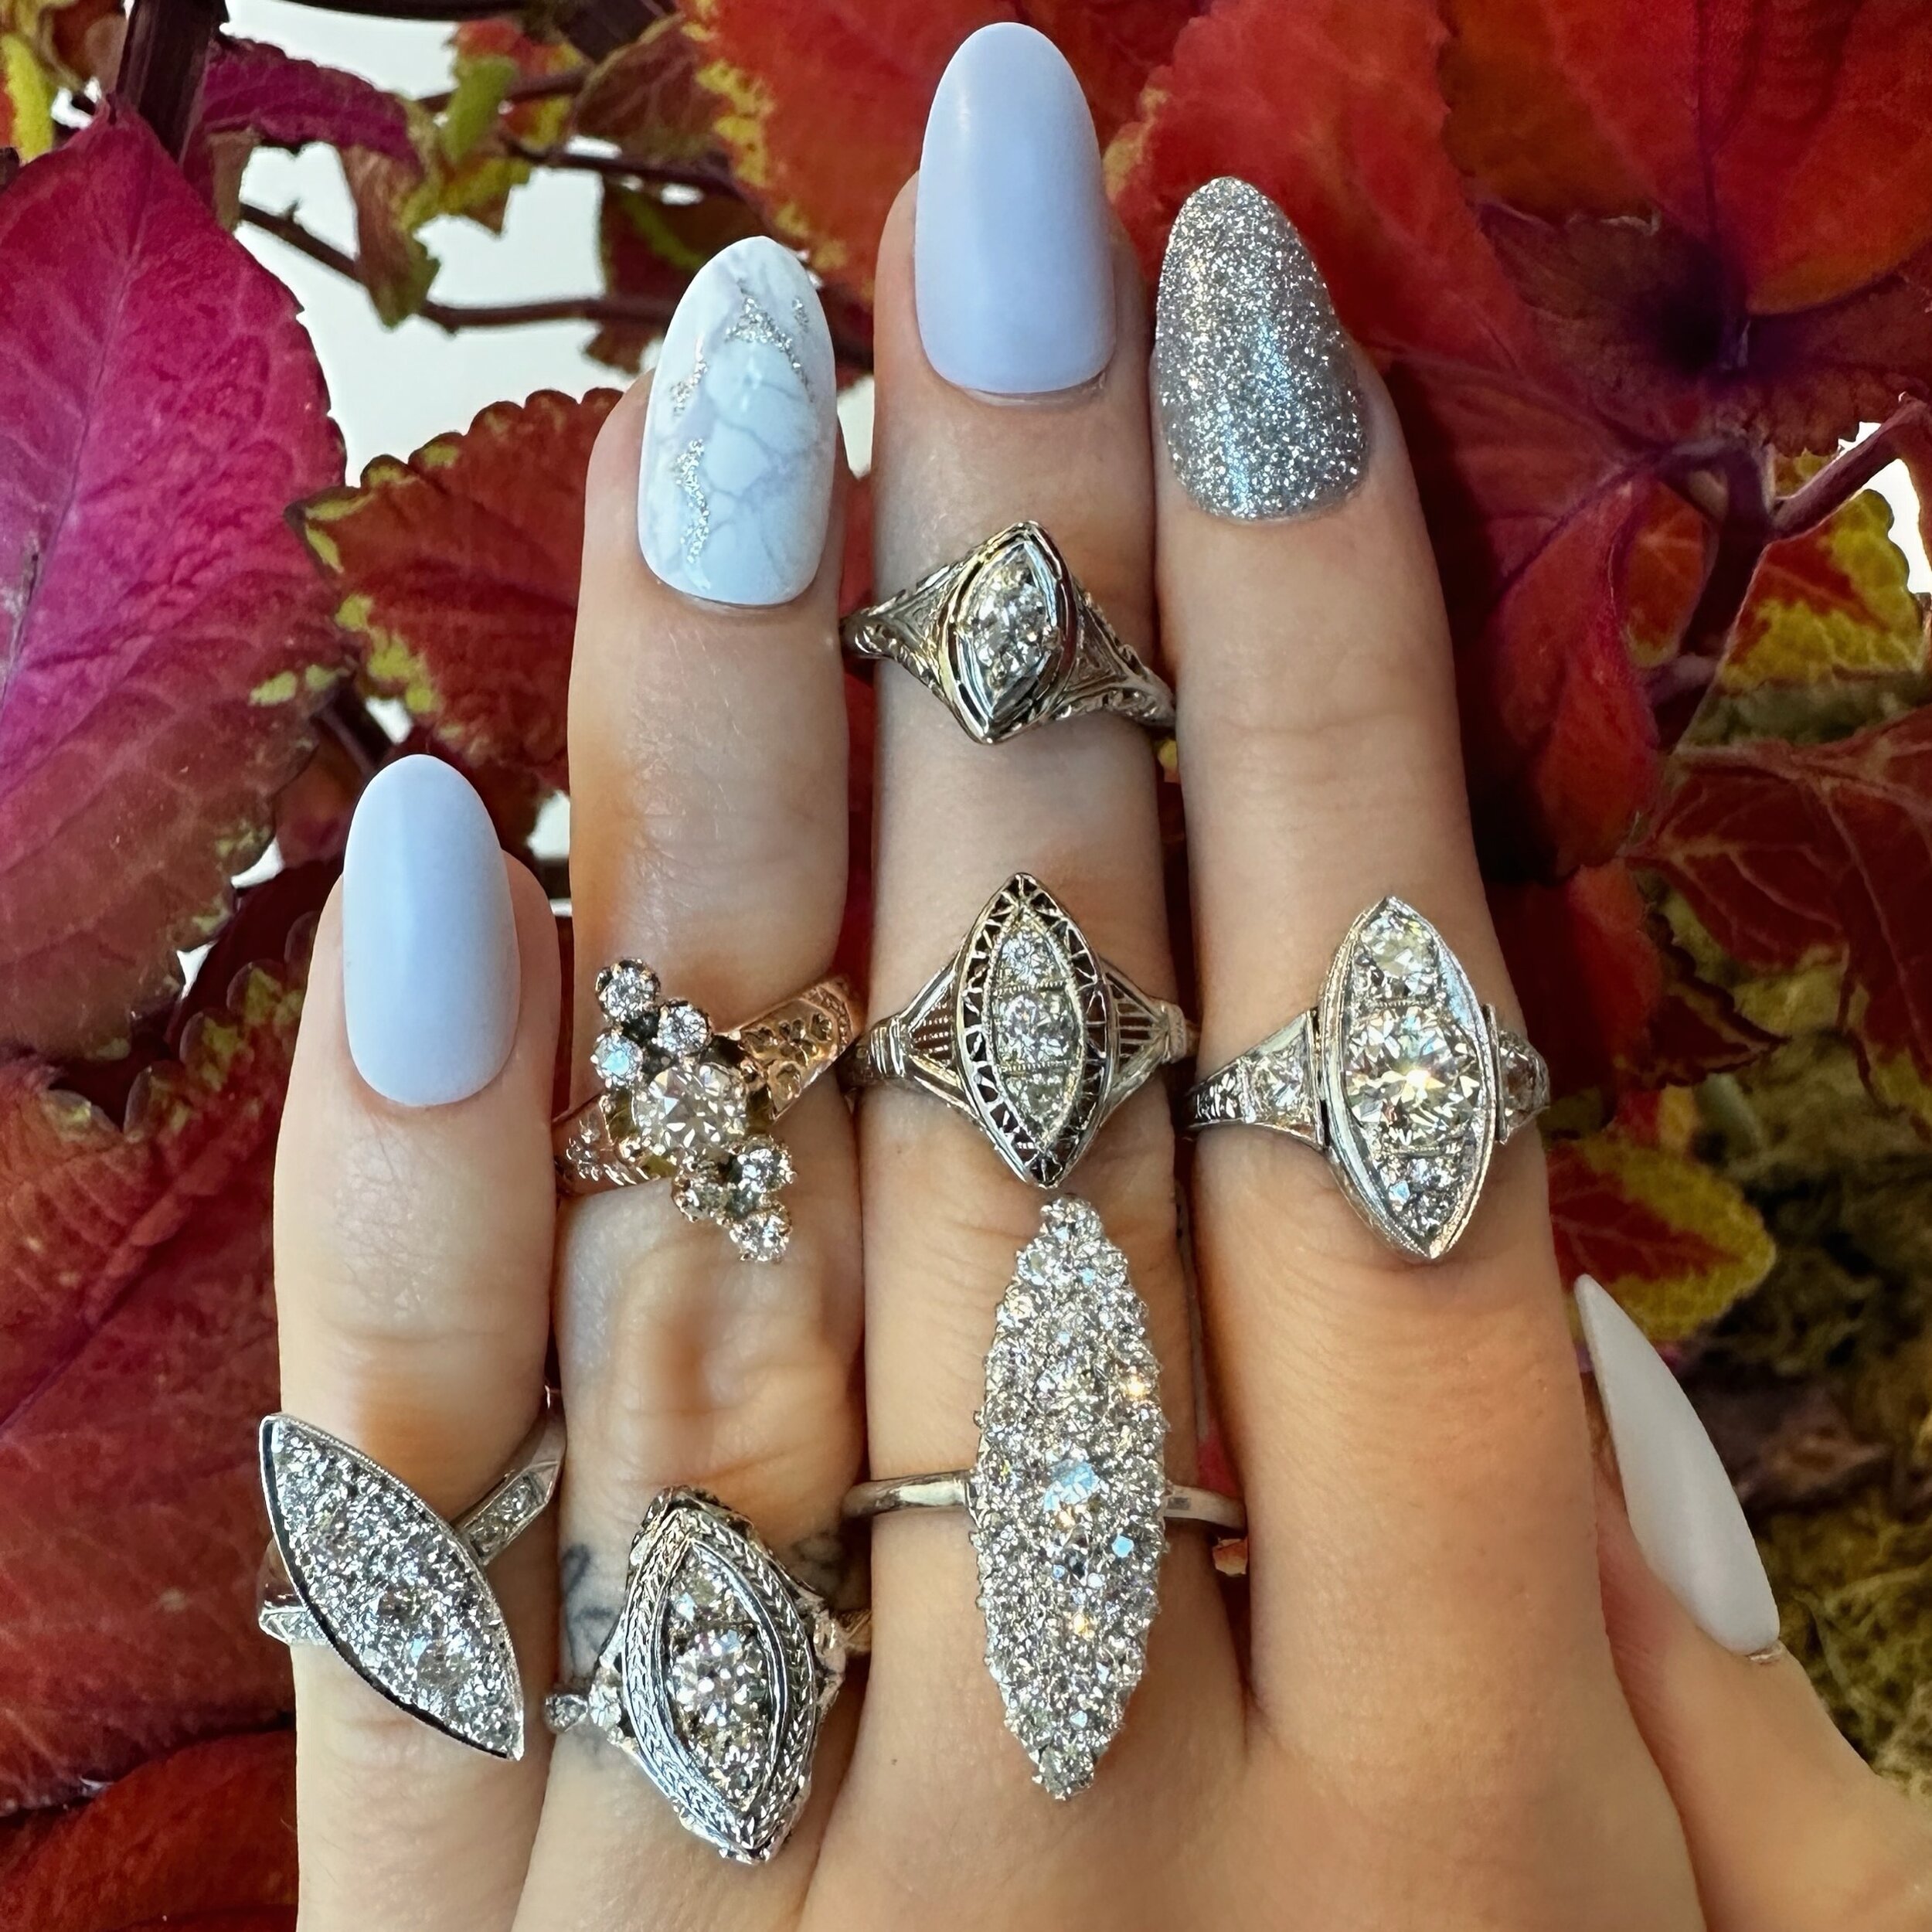 This one is for all the people out there who love navette rings! 

This style was popular during the Victorian and Edwardian eras. The word &ldquo;navette&rdquo; originates from French meaning &ldquo;little boat&rdquo; which you can see in this photo